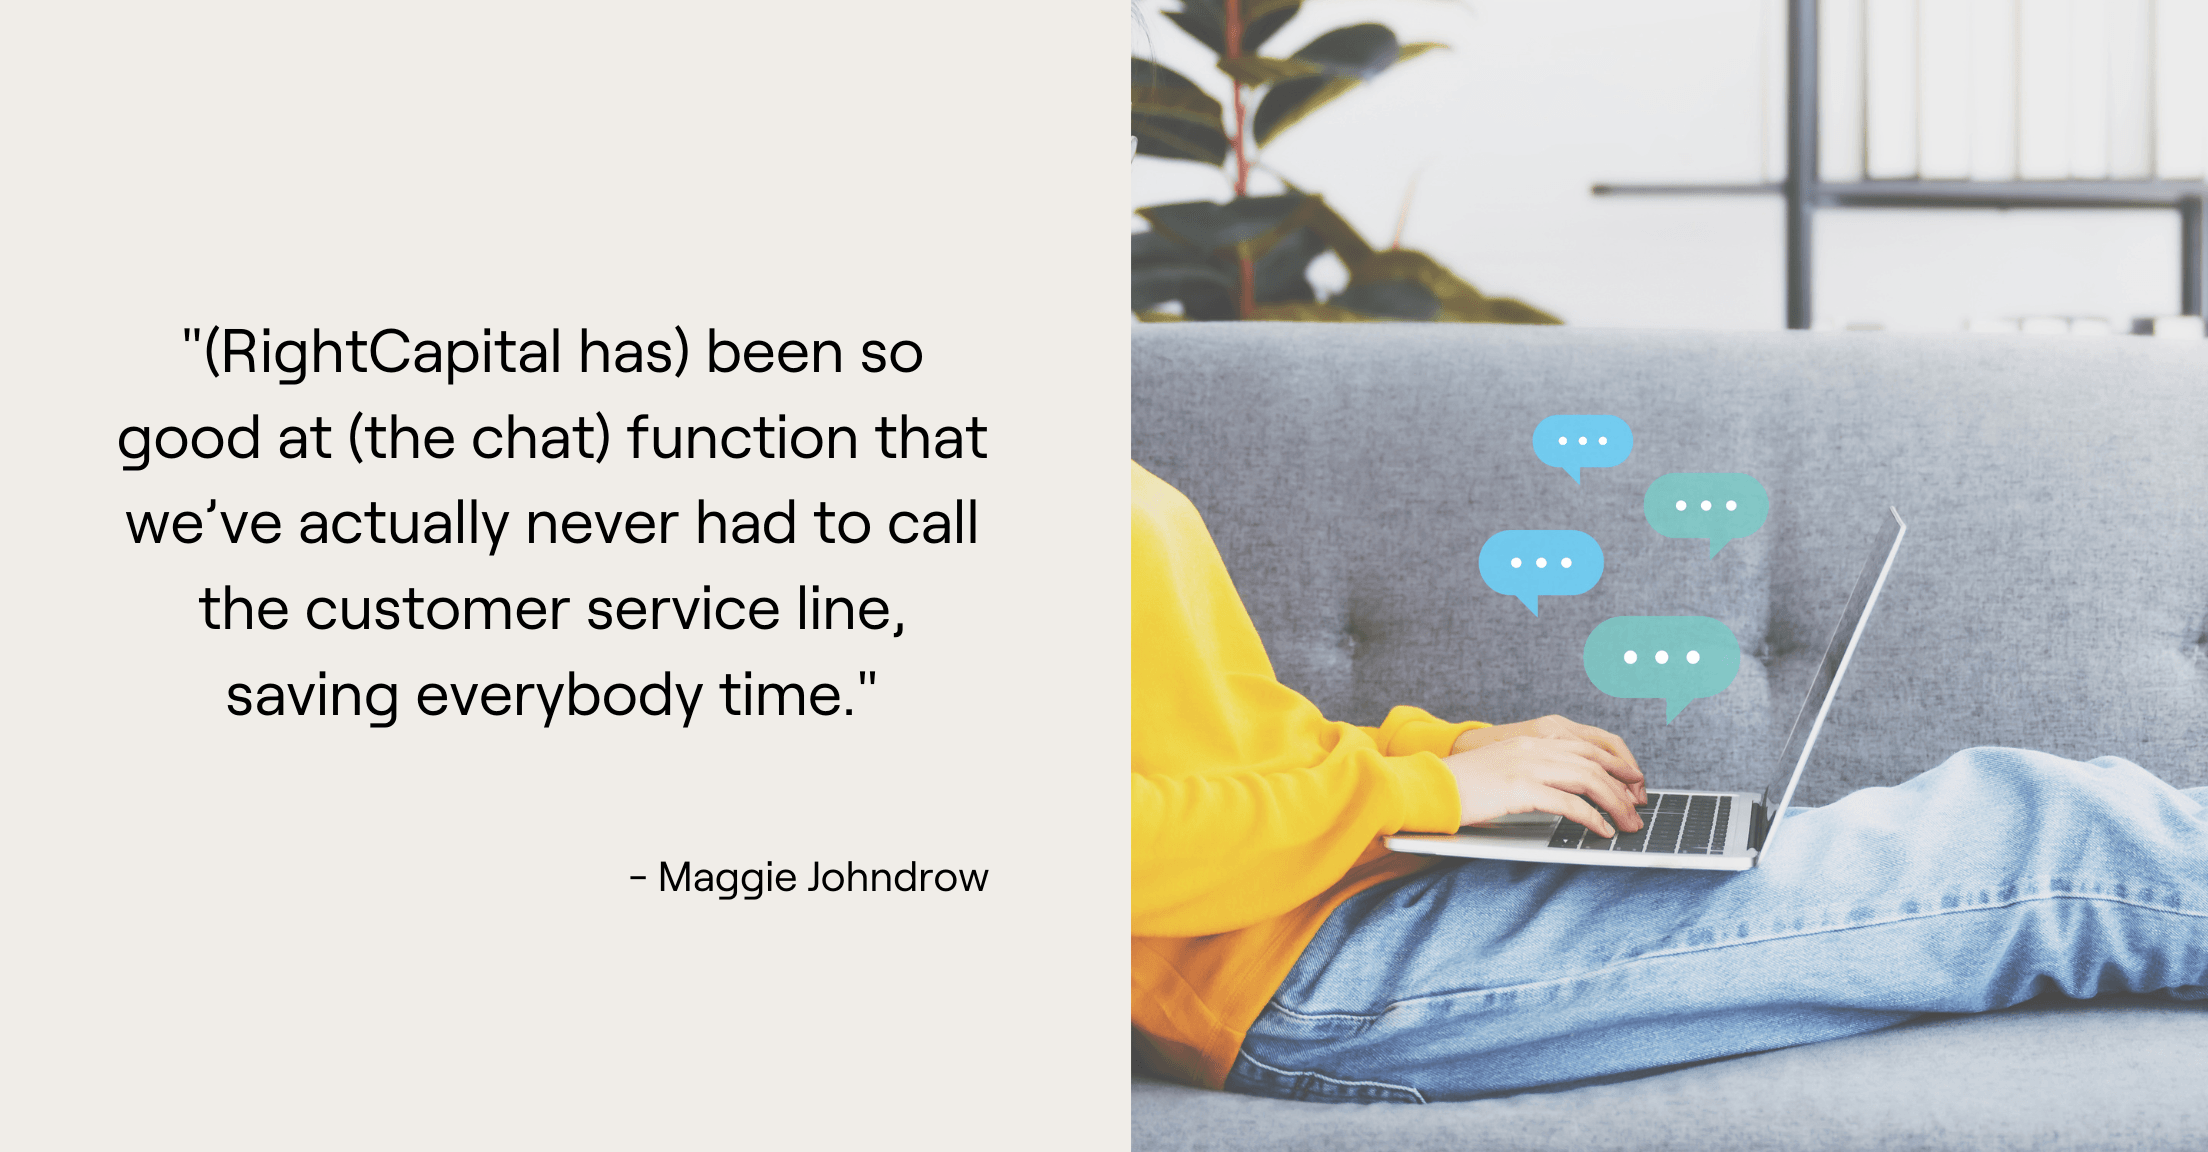 Person on couch chatting on computer and Maggie Johndrow quote, "(RightCapital has) been so good at (the chat) function that we’ve actually never had to call the customer service line, saving everybody time."